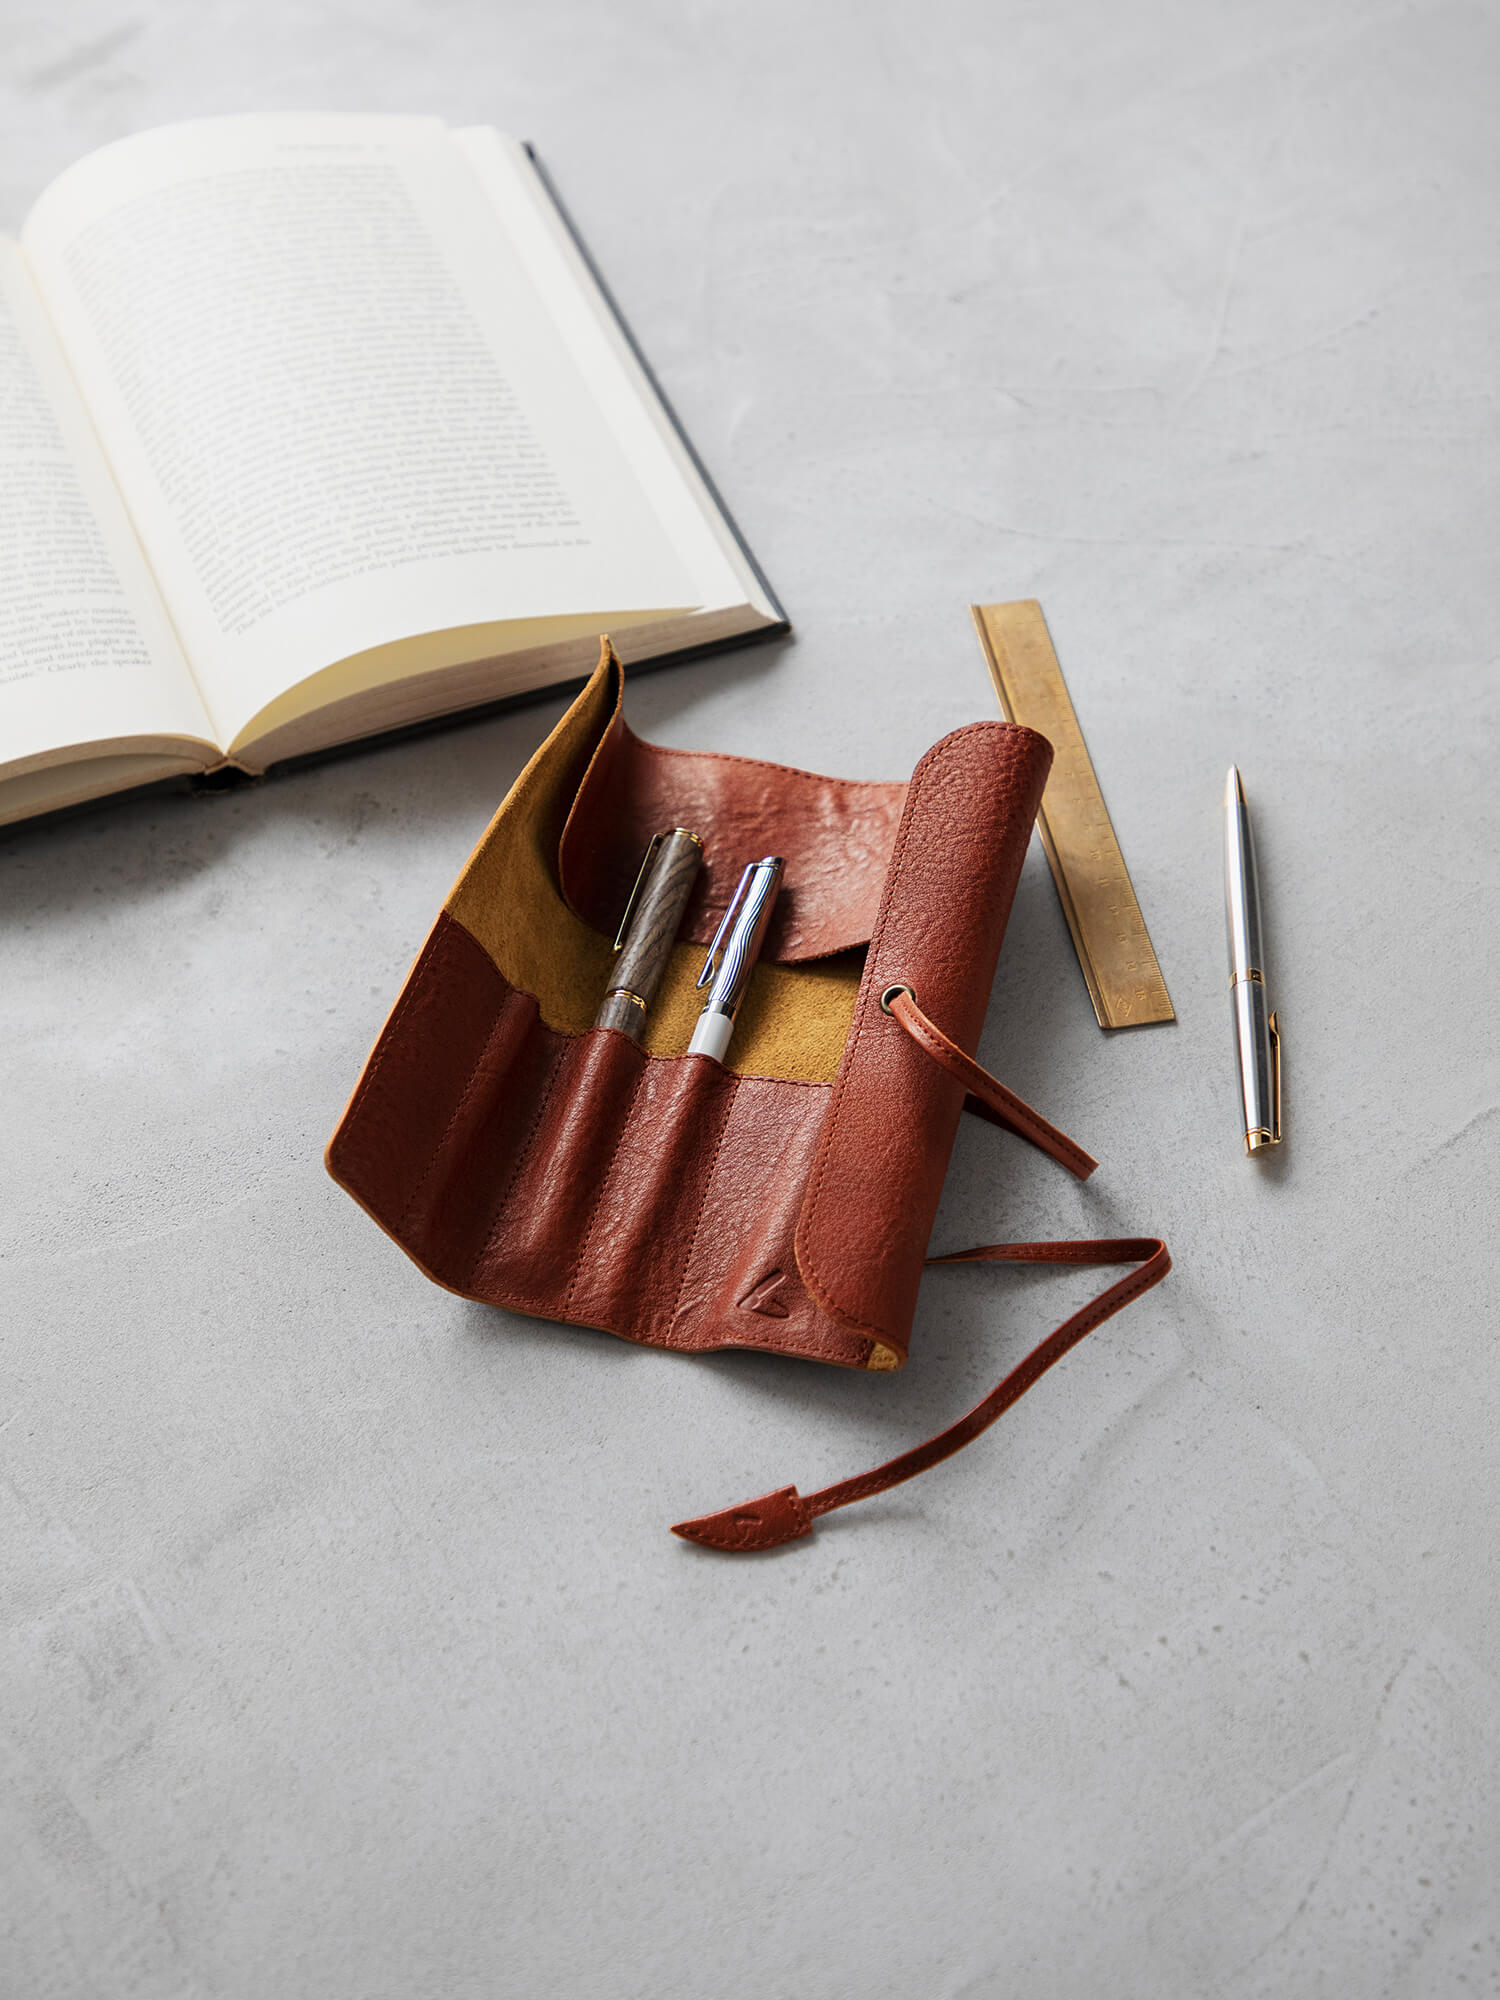 DIY Pencil Case - Genuine Leather Roll Up Pen Pencil Case, Back to